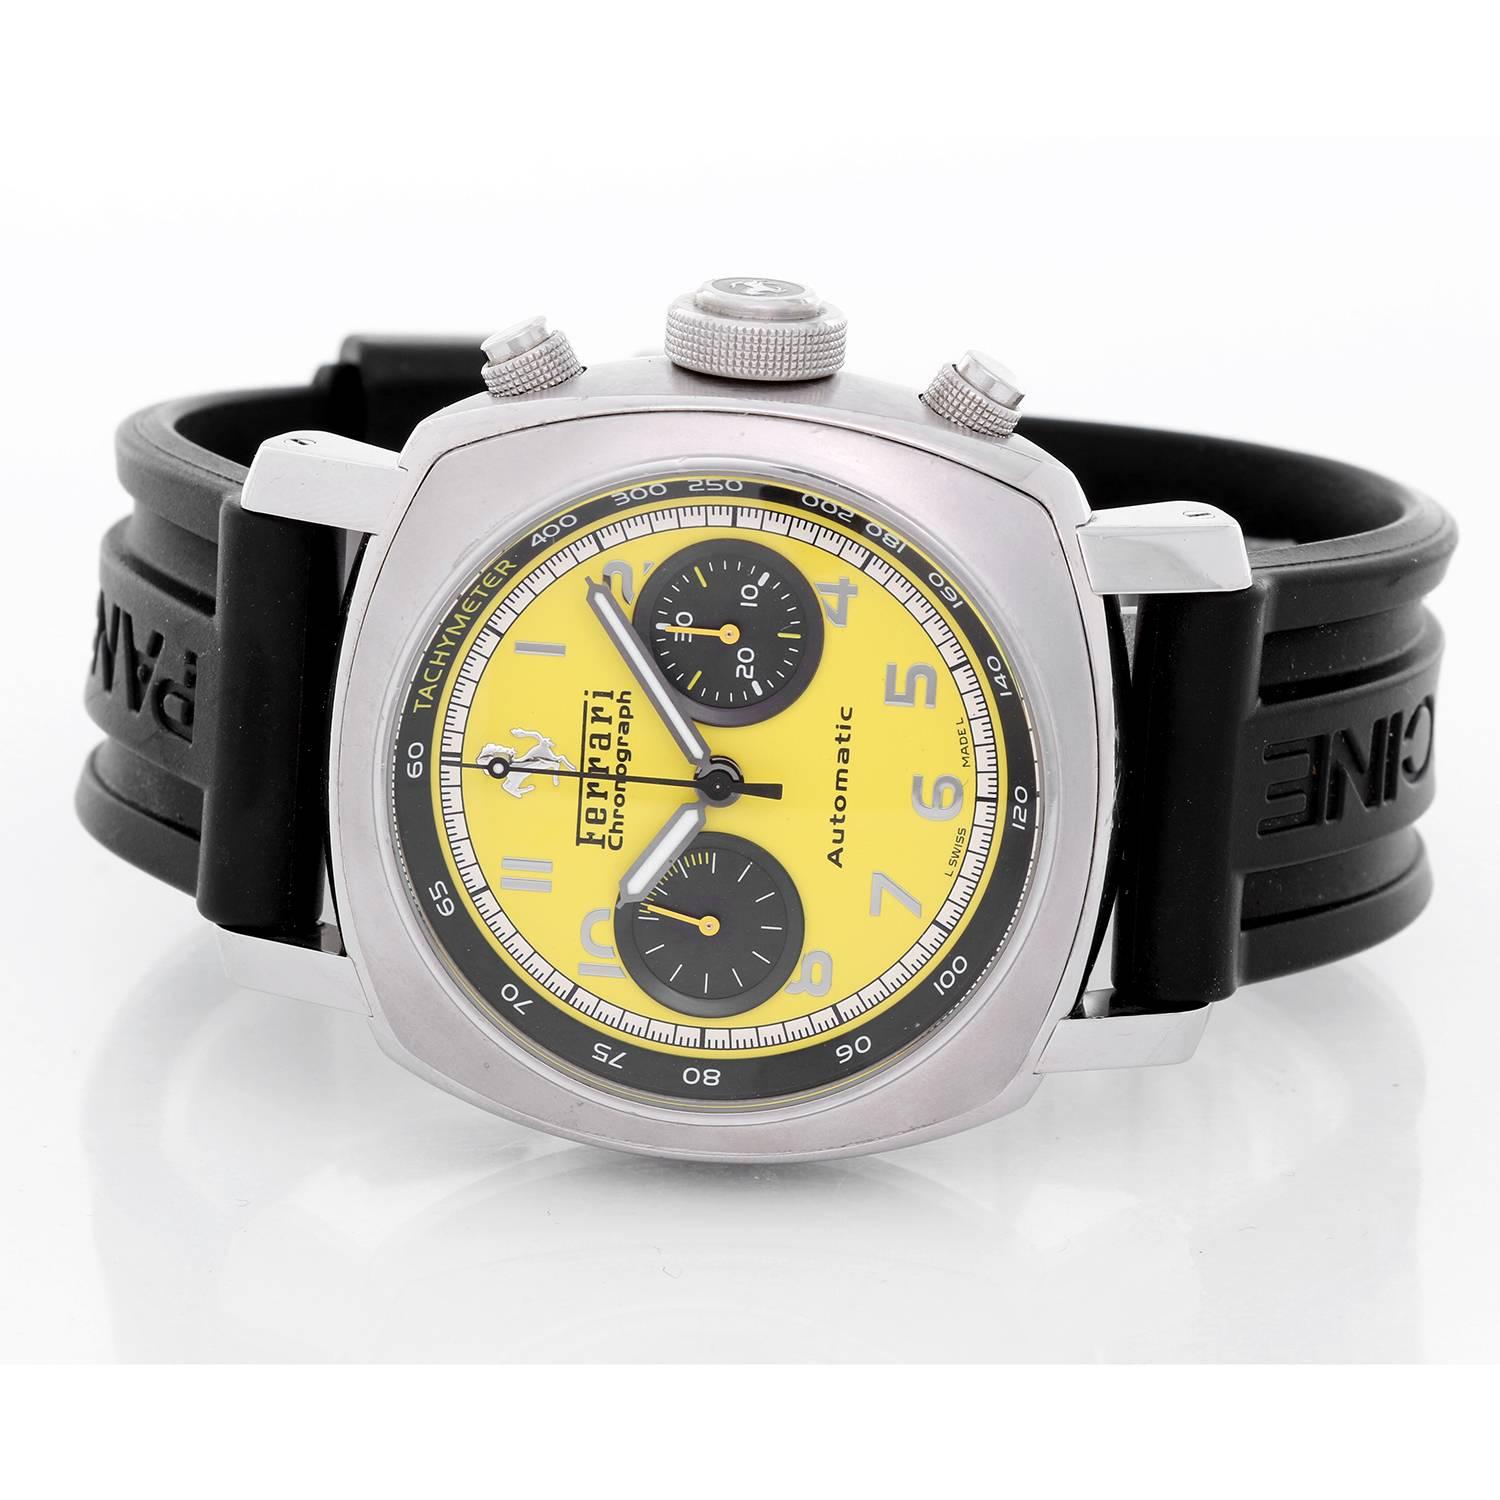 Ferrari by Panerai  Granturismo Chronograph Men's Watch FER00011 -  Automatic. Stainless steel case ( 45 mm ). Yellow dial with black sub dials at 3 & 9 o'clock. Ferrari logo on the dial. Arabic numerals. Panerai rubber bracelet. Pre-owned with